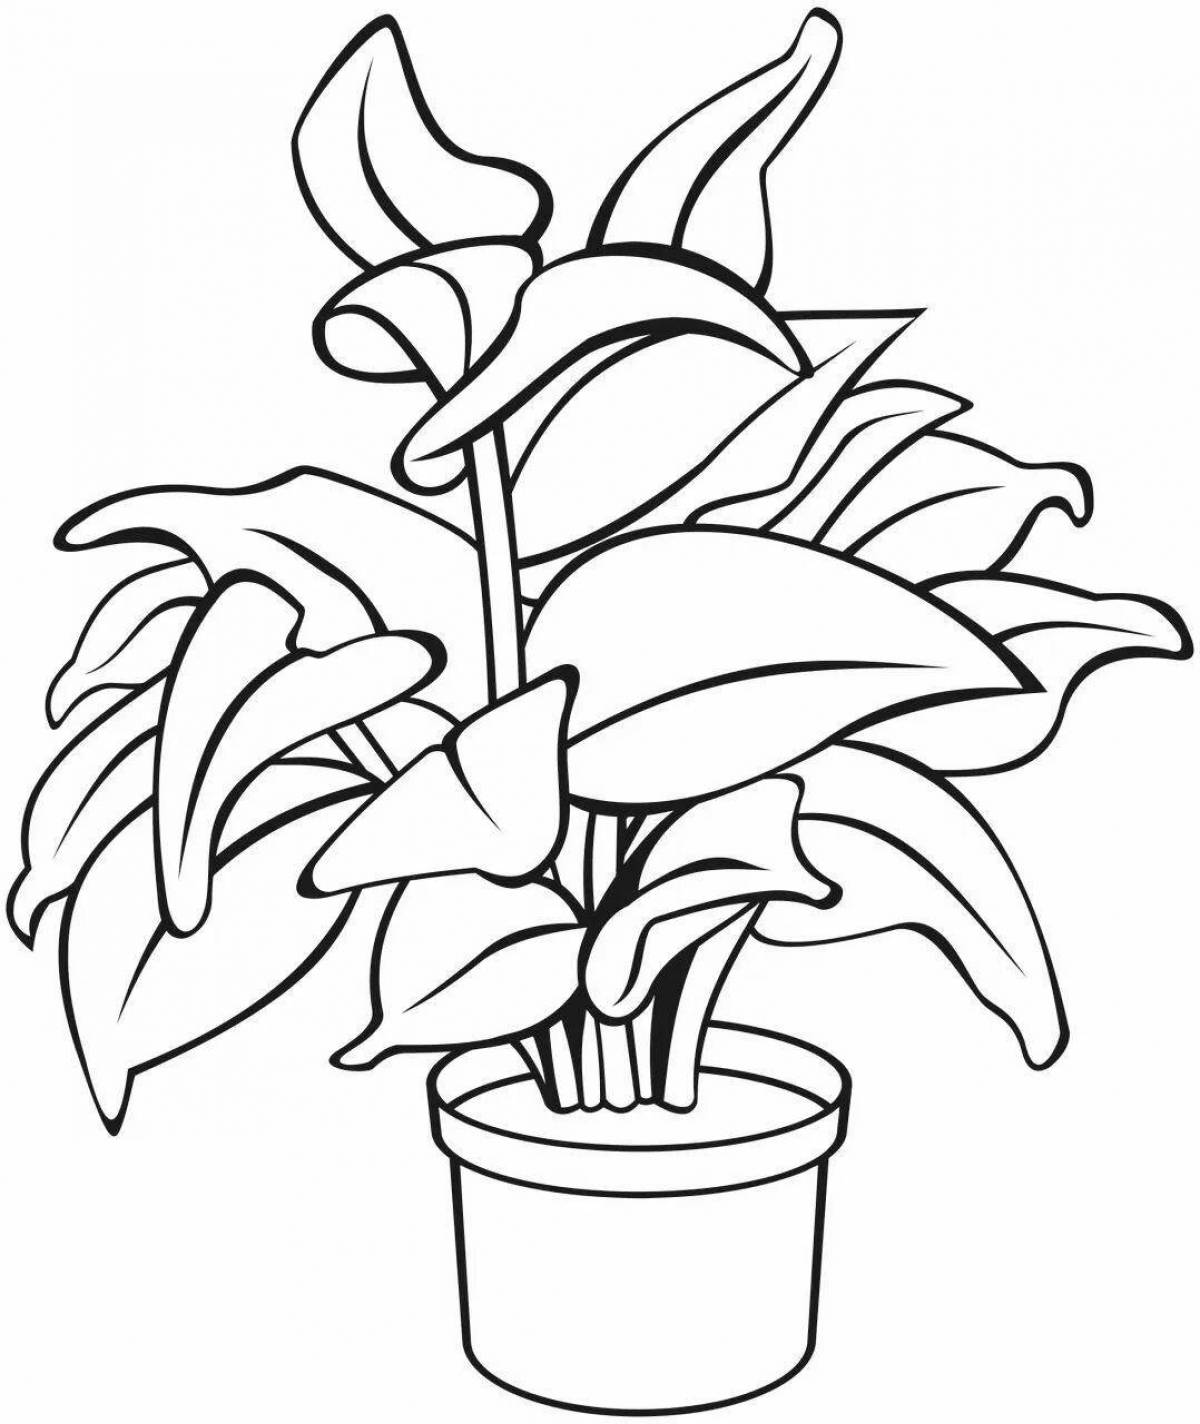 Coloring book wonderful houseplant for children 6-7 years old